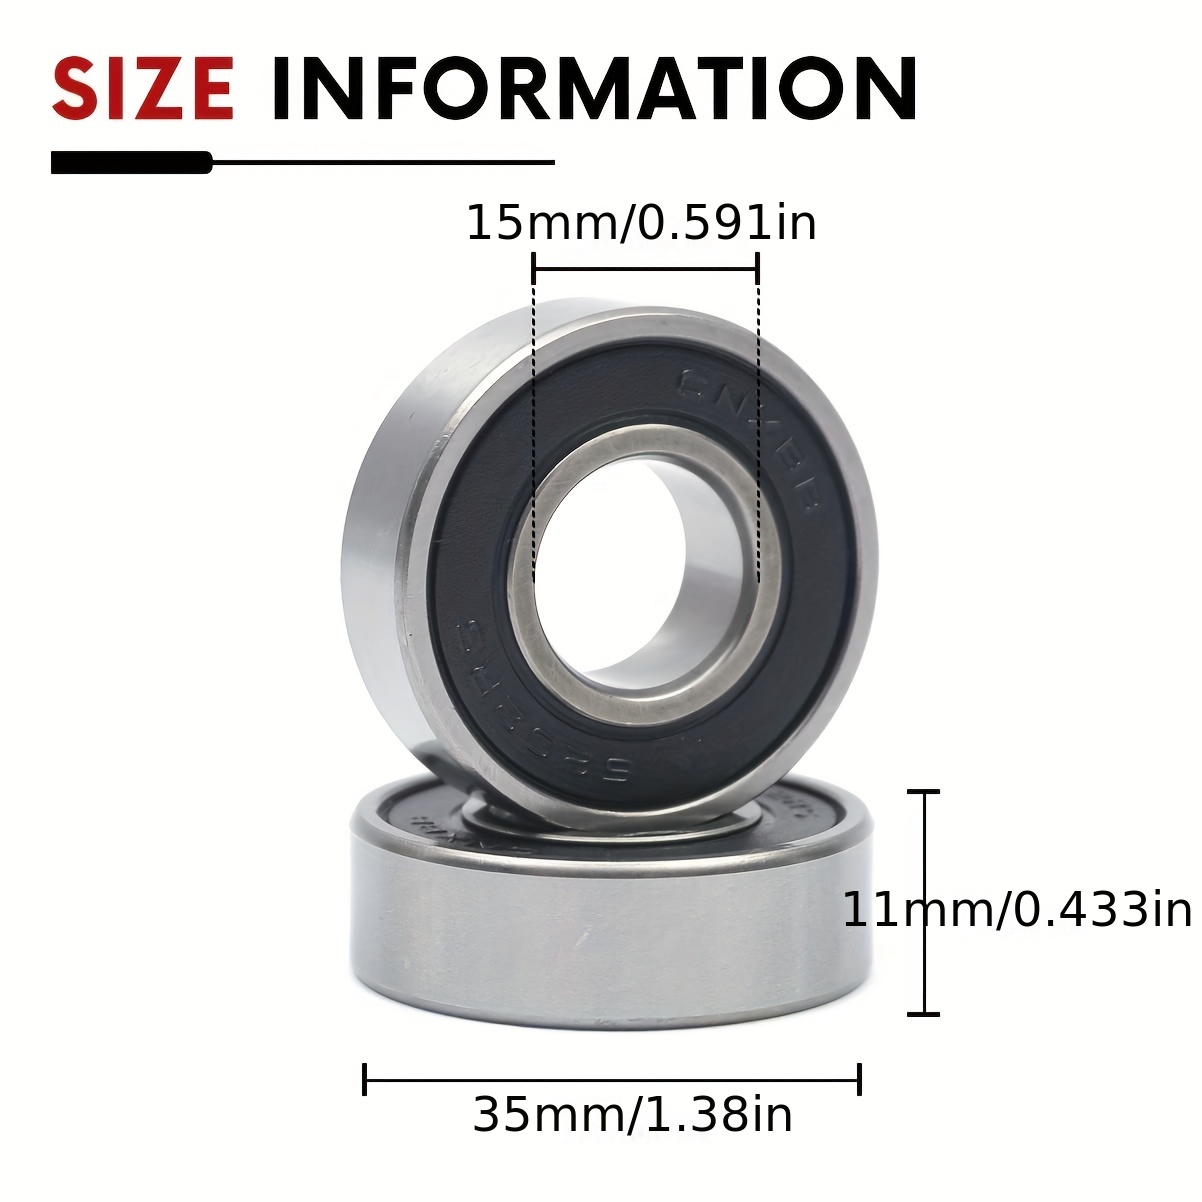 10pcs pack 6202 2rs 6202 zz bearing lubricated chrome steel sealed ball bearing 15x35x11mm bearings with rubber seal high rpm support